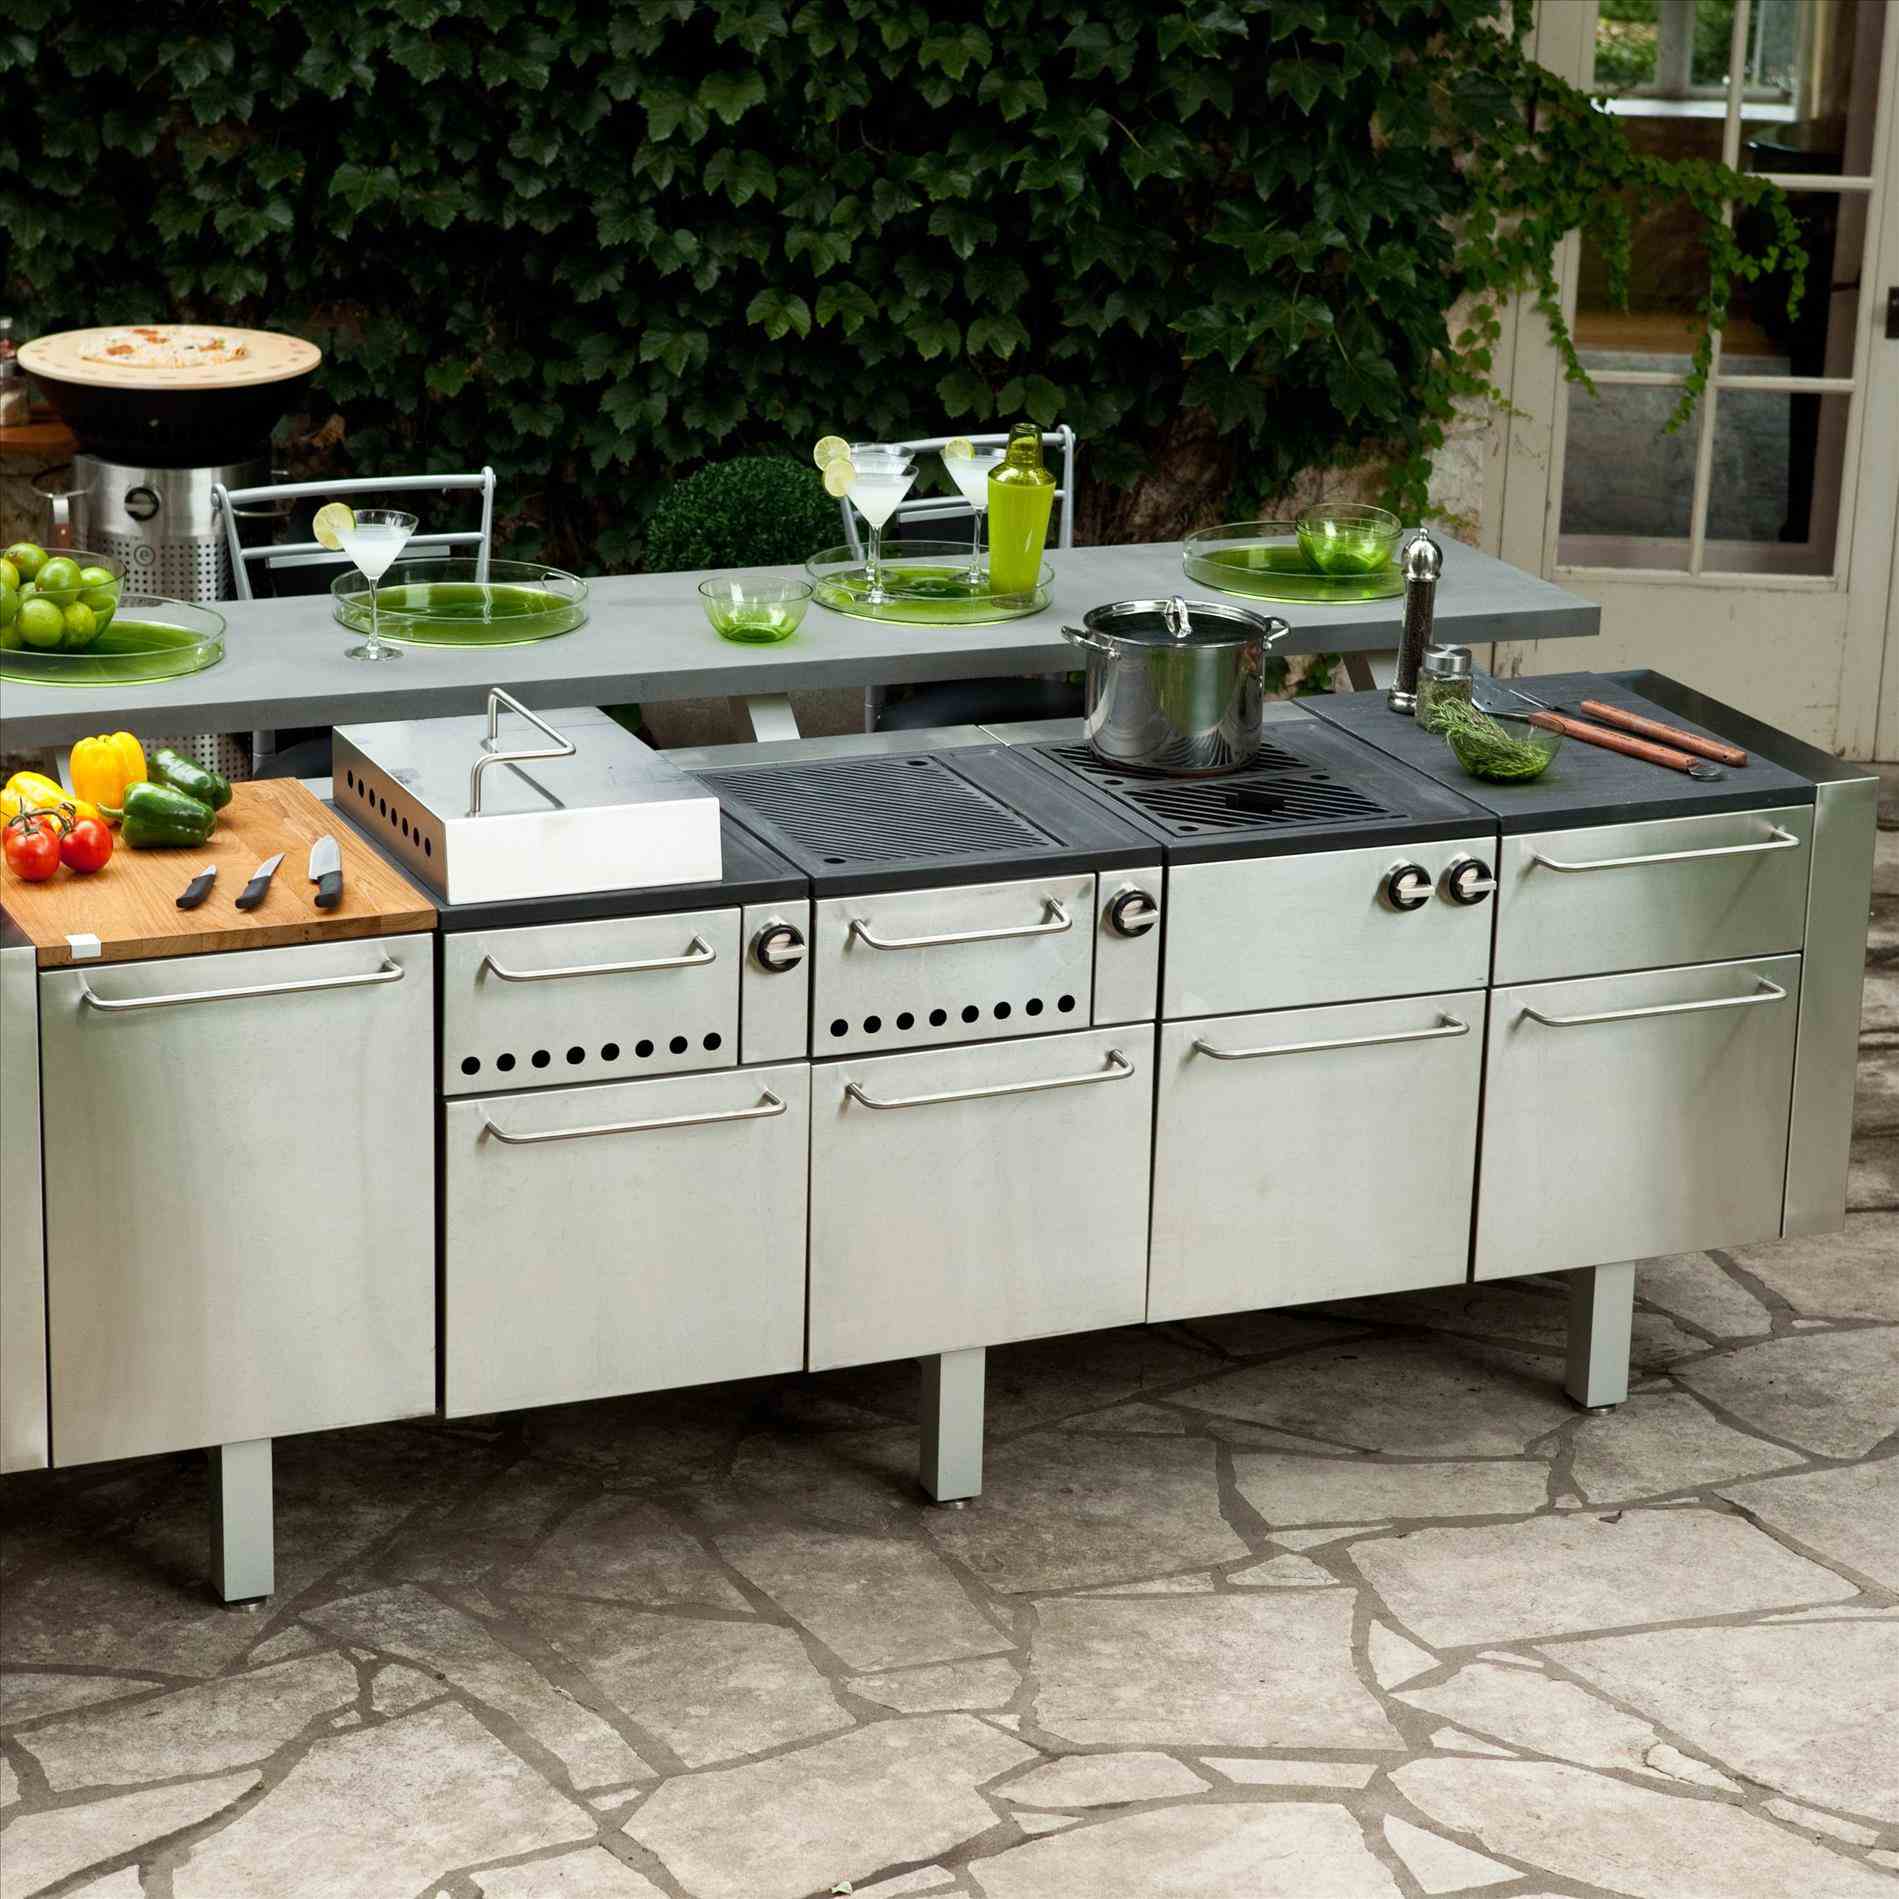 Most of the interior colors specially designed for outdoor kitchen appliances Costco Hotcanadianpharmacy us OHMOBTY